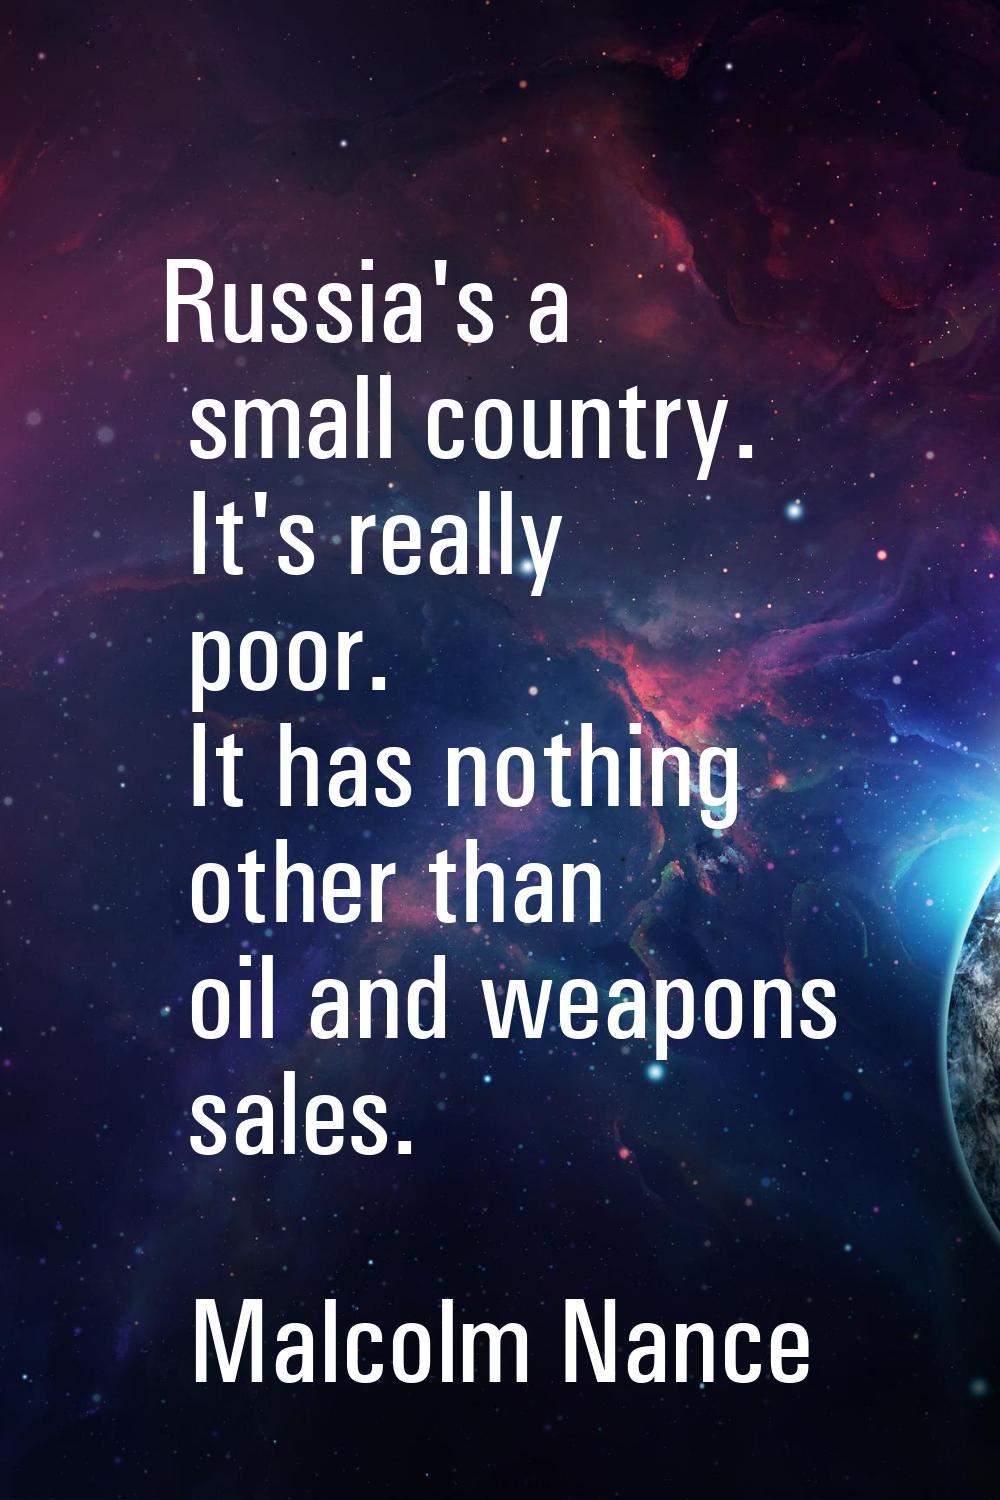 Russia's a small country. It's really poor. It has nothing other than oil and weapons sales.